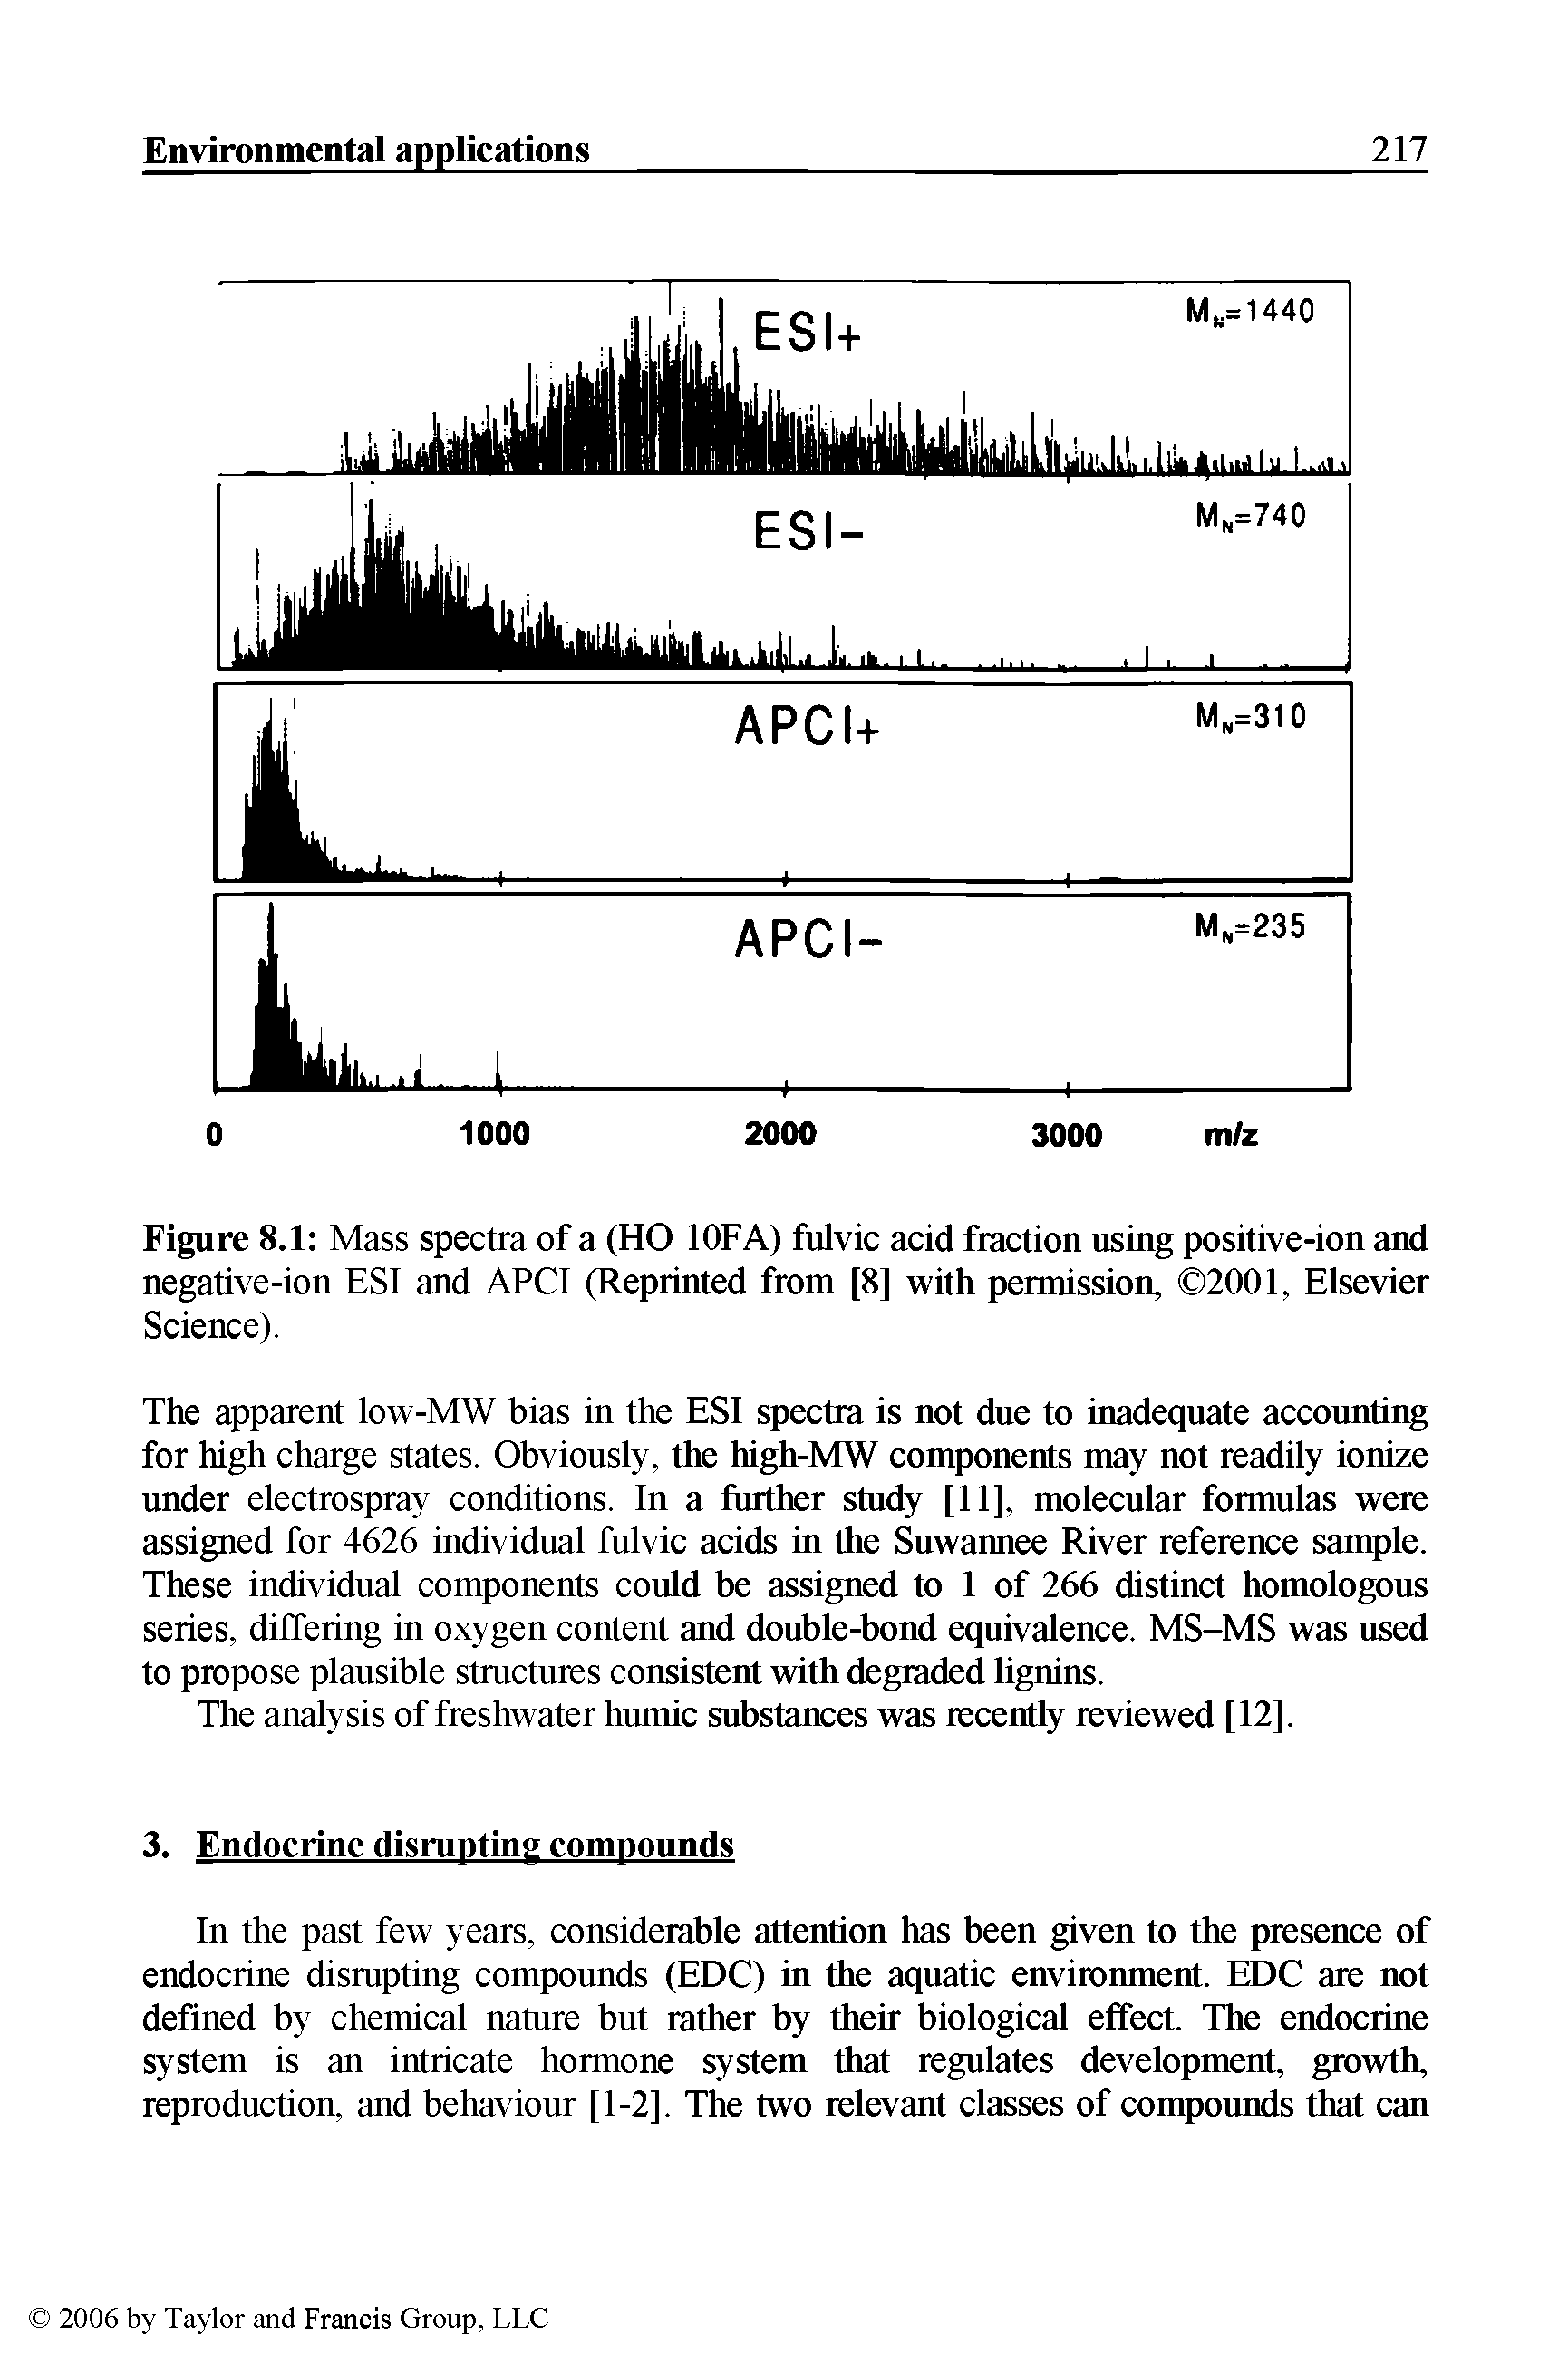 Figure 8.1 Mass spectra of a (HO lOFA) fulvic acid fraction using positive-ion and negative-ion ESI and APCl (Reprinted from [8] with permission, 2001, Elsevier Science).